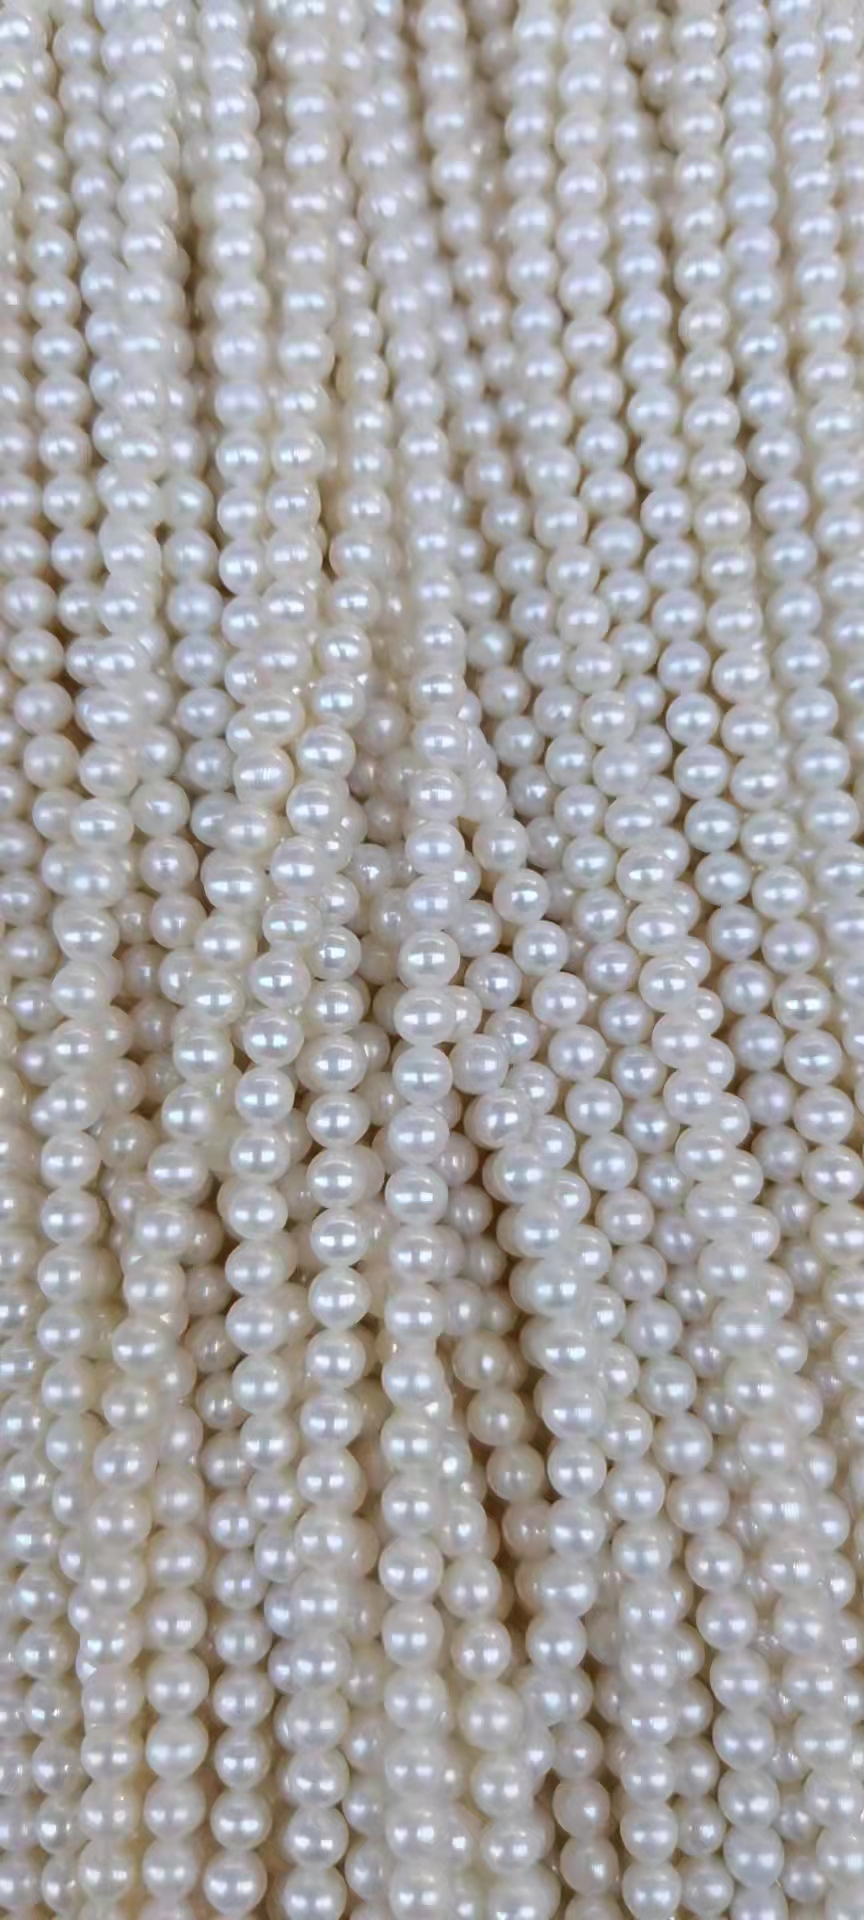 4-5 mm mini round freshwater pearl,The Pearl Source, quality grade AAA loose freshwater pearls wholesale Pure freshwater pearl strand